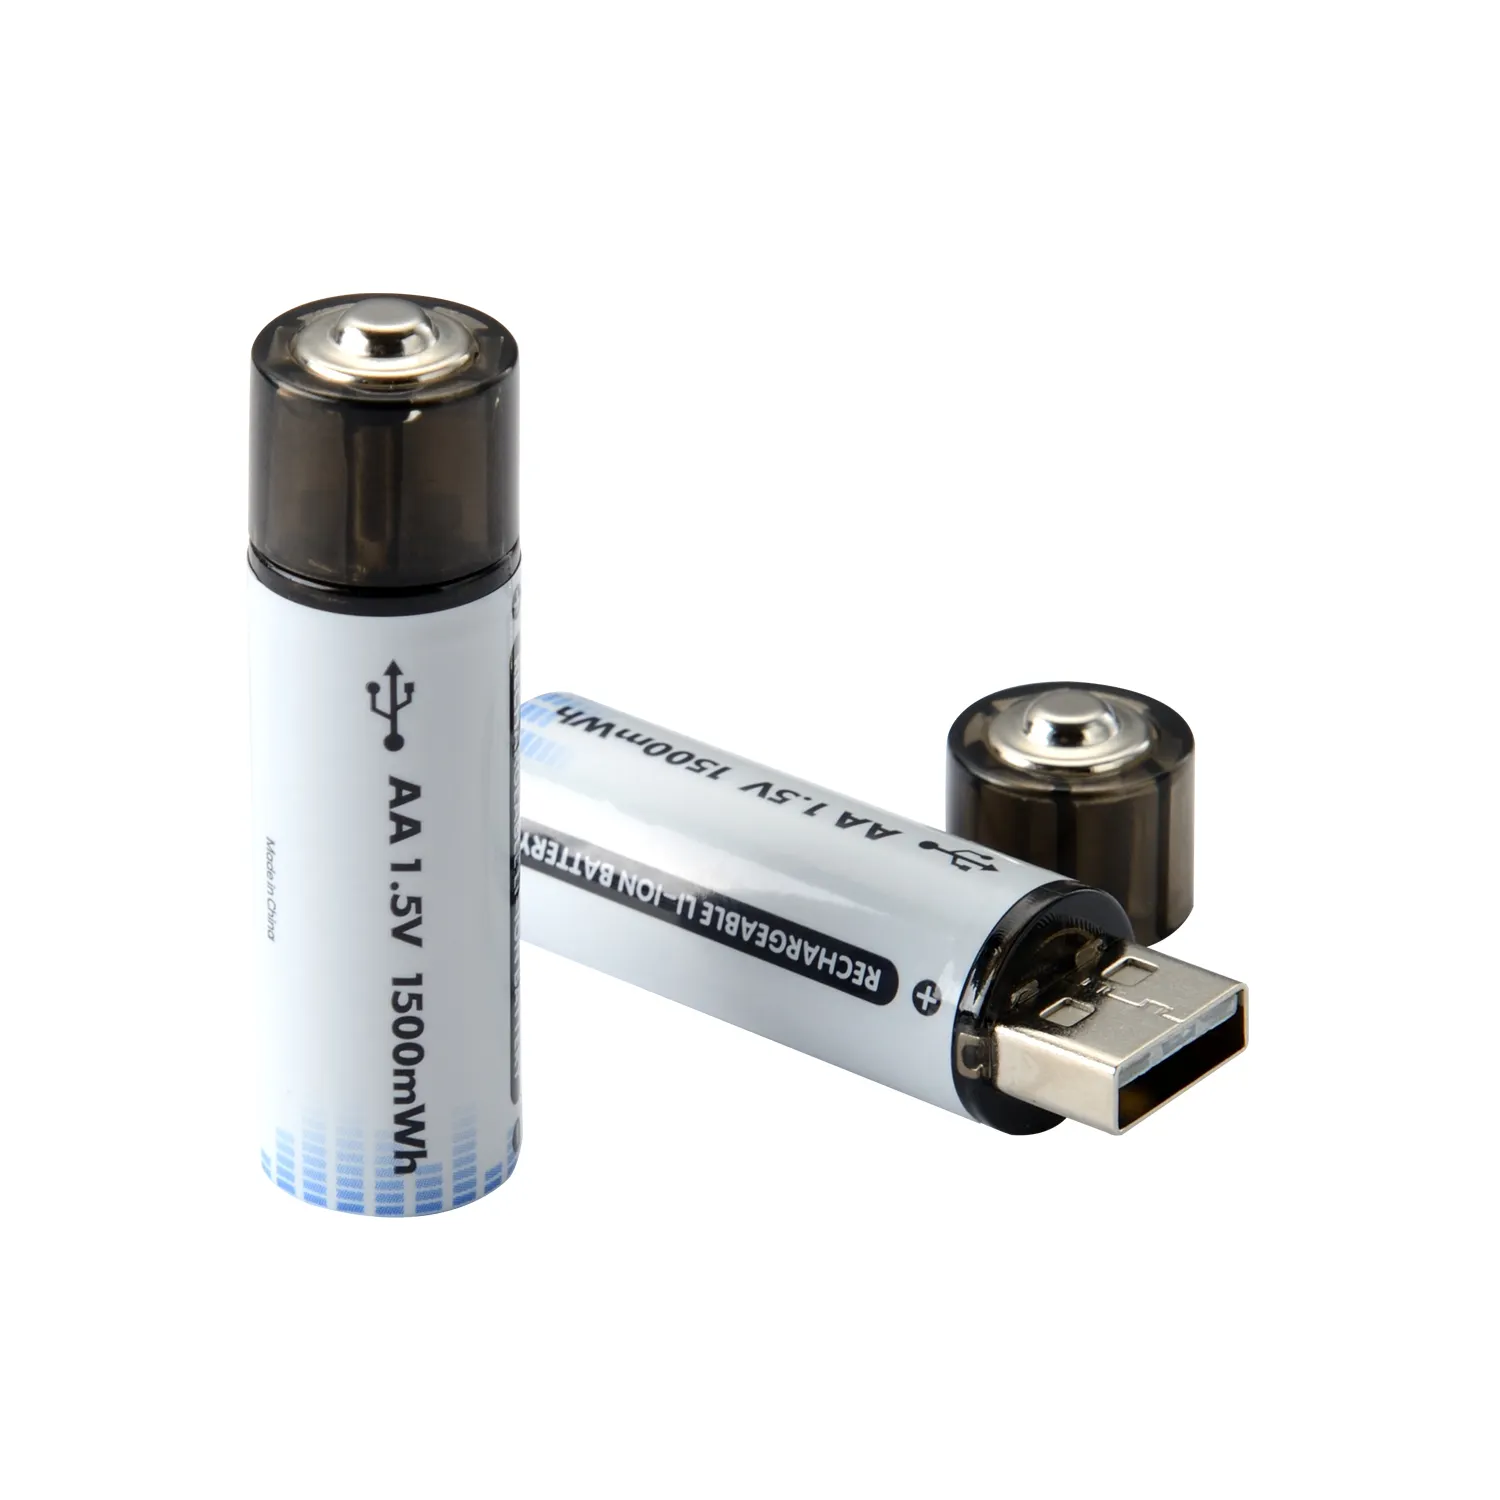 Type-c Usb Batteries 1.5v 500mWh 1000mWh 2200mWh 2800mWh lithium ion AA AAA usb Cell rechargeable battery